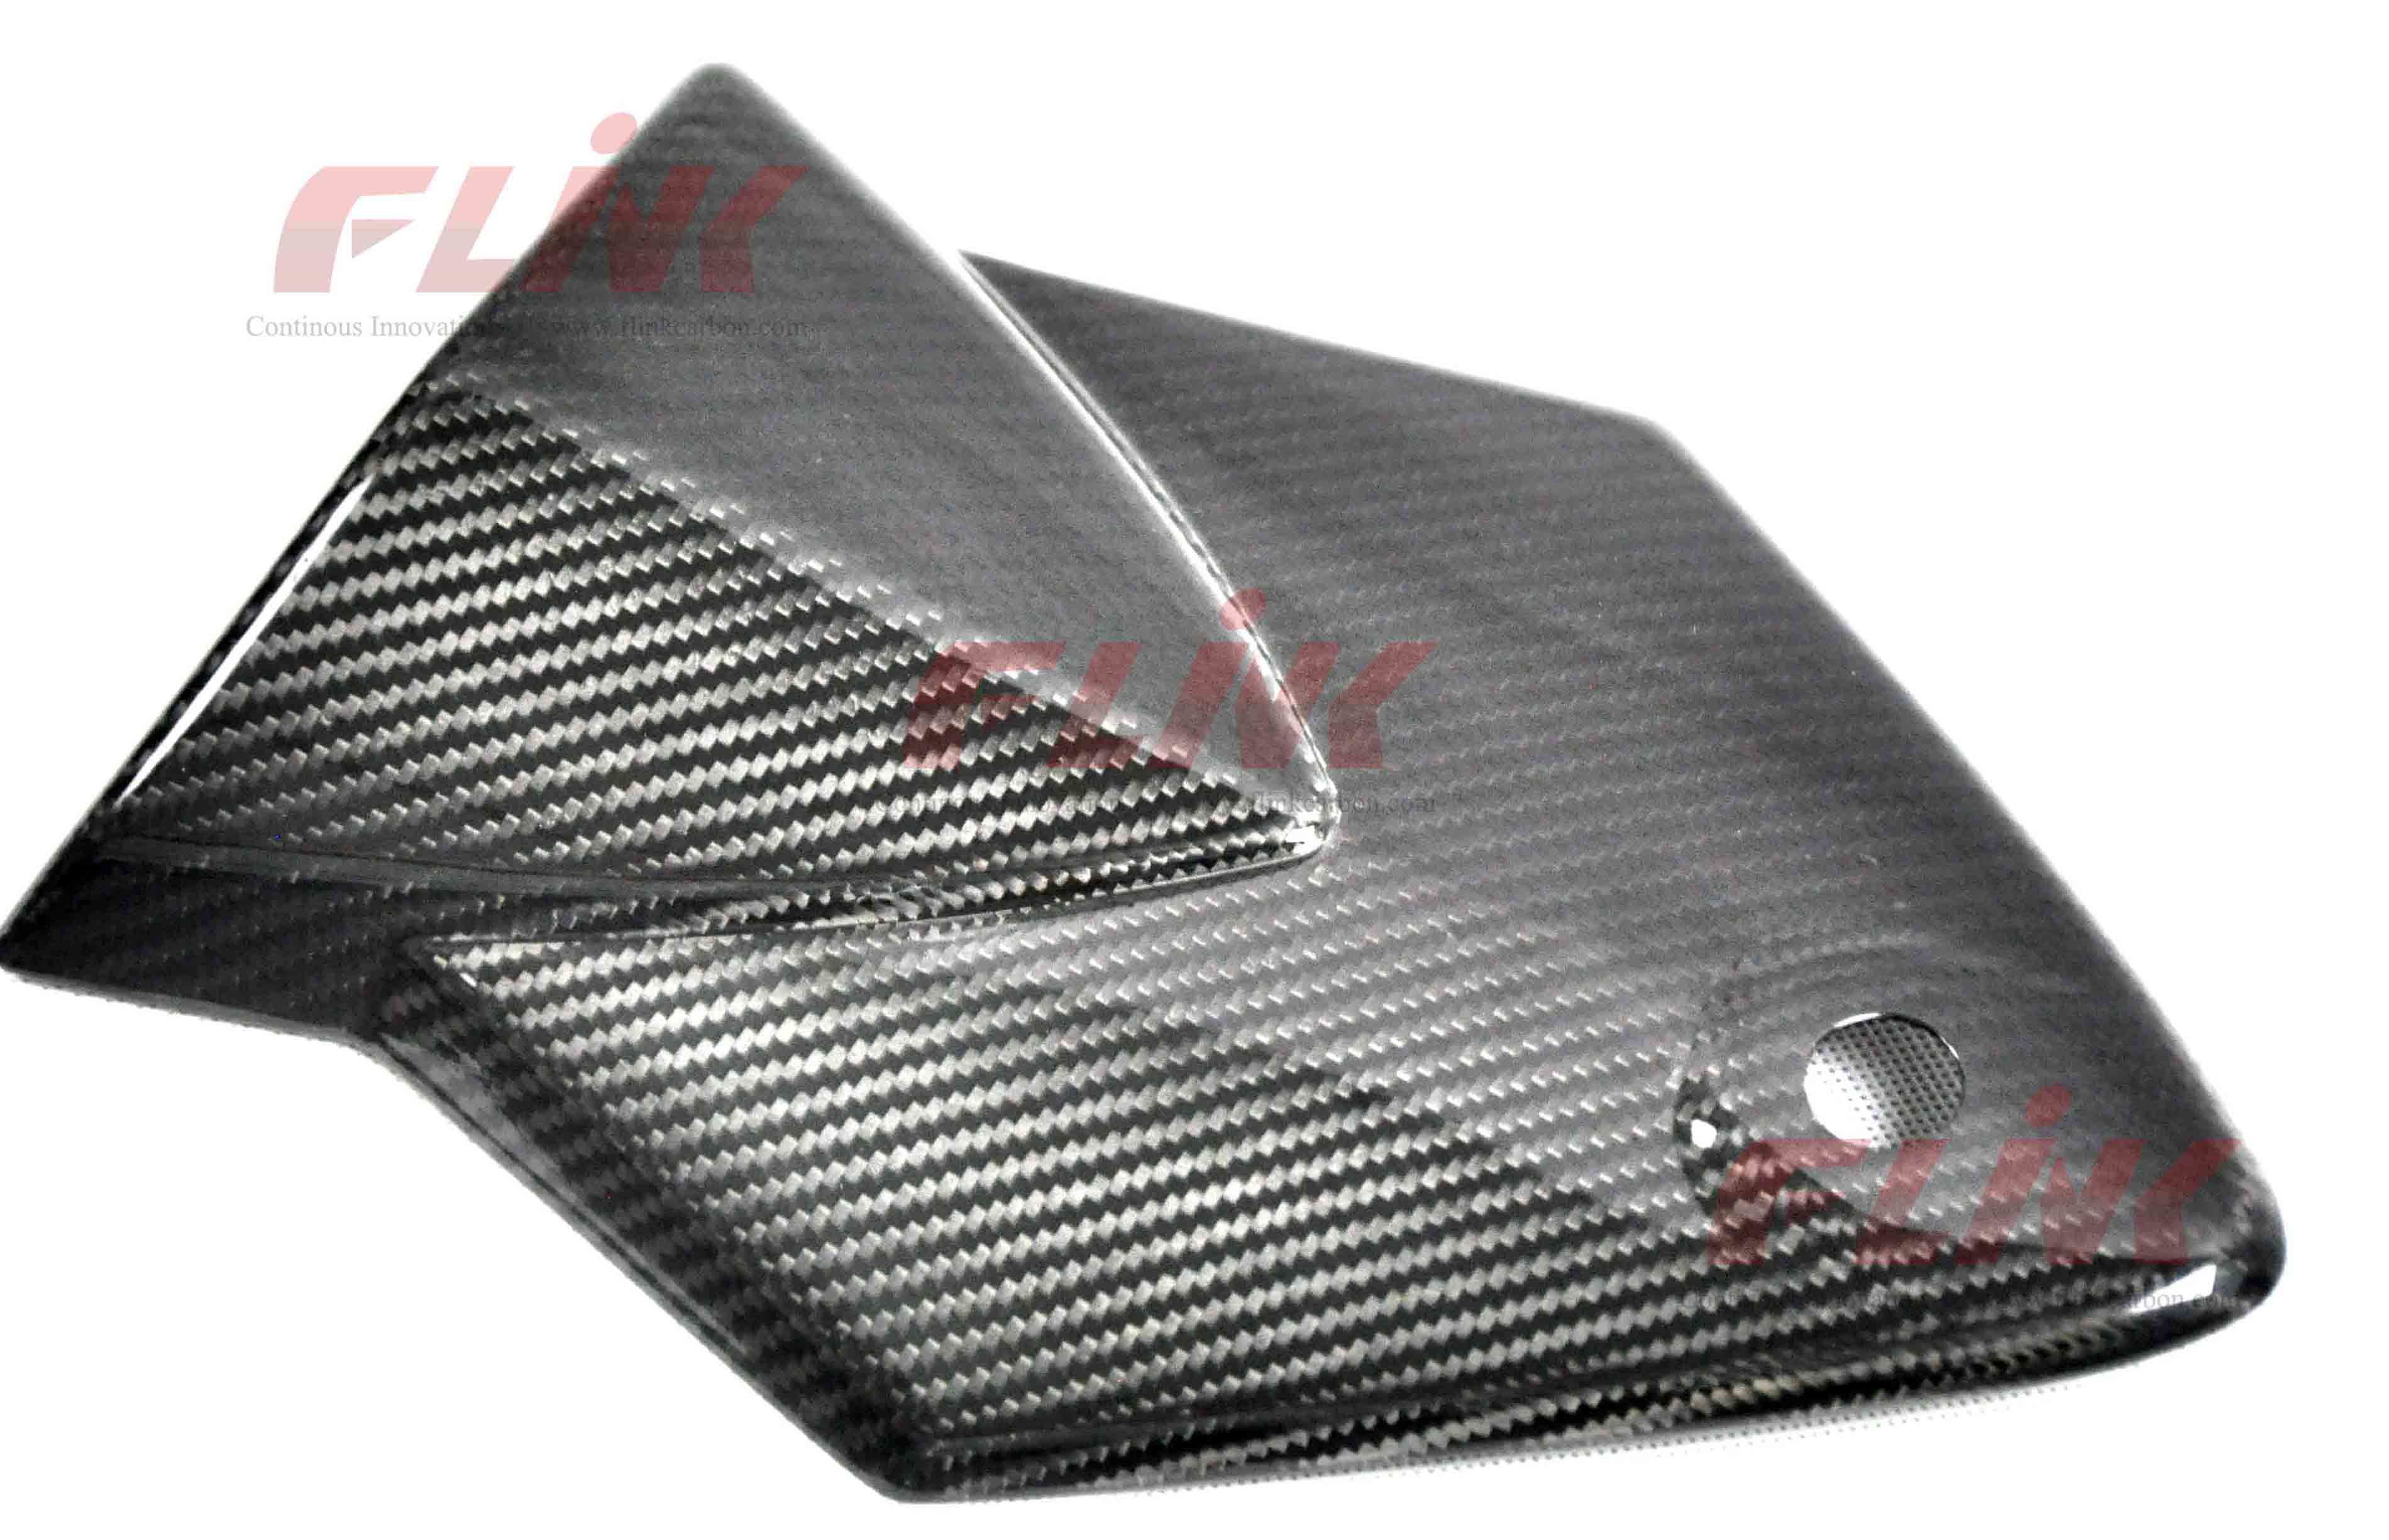 Carbon Fiber Seat Cowl for BMW S1000rr (Replacement)